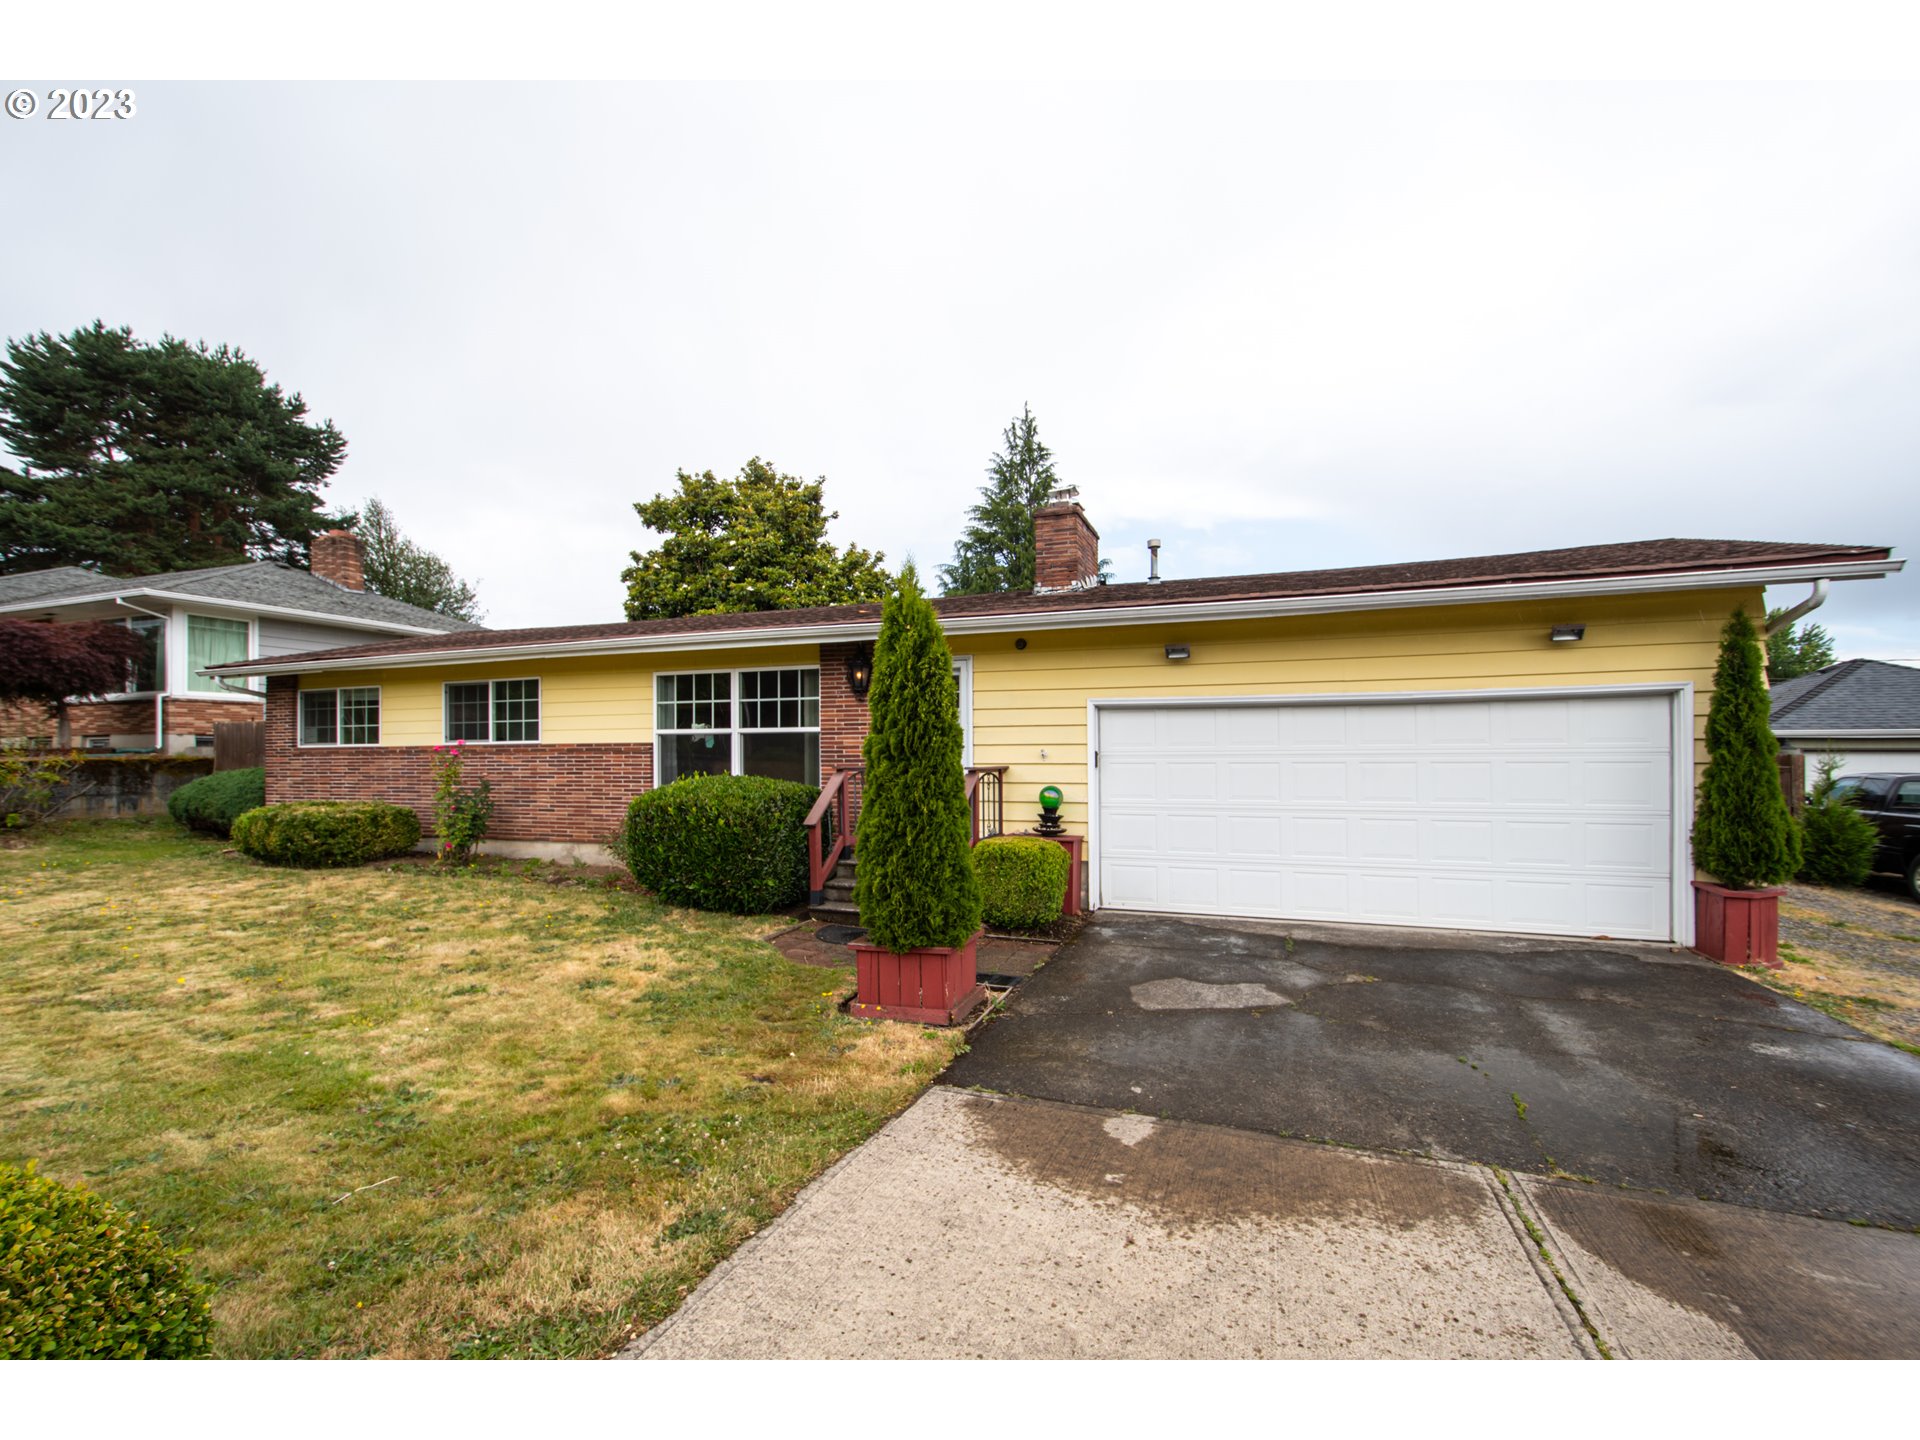 112 NW 78th St, Vancouver, WA 98665